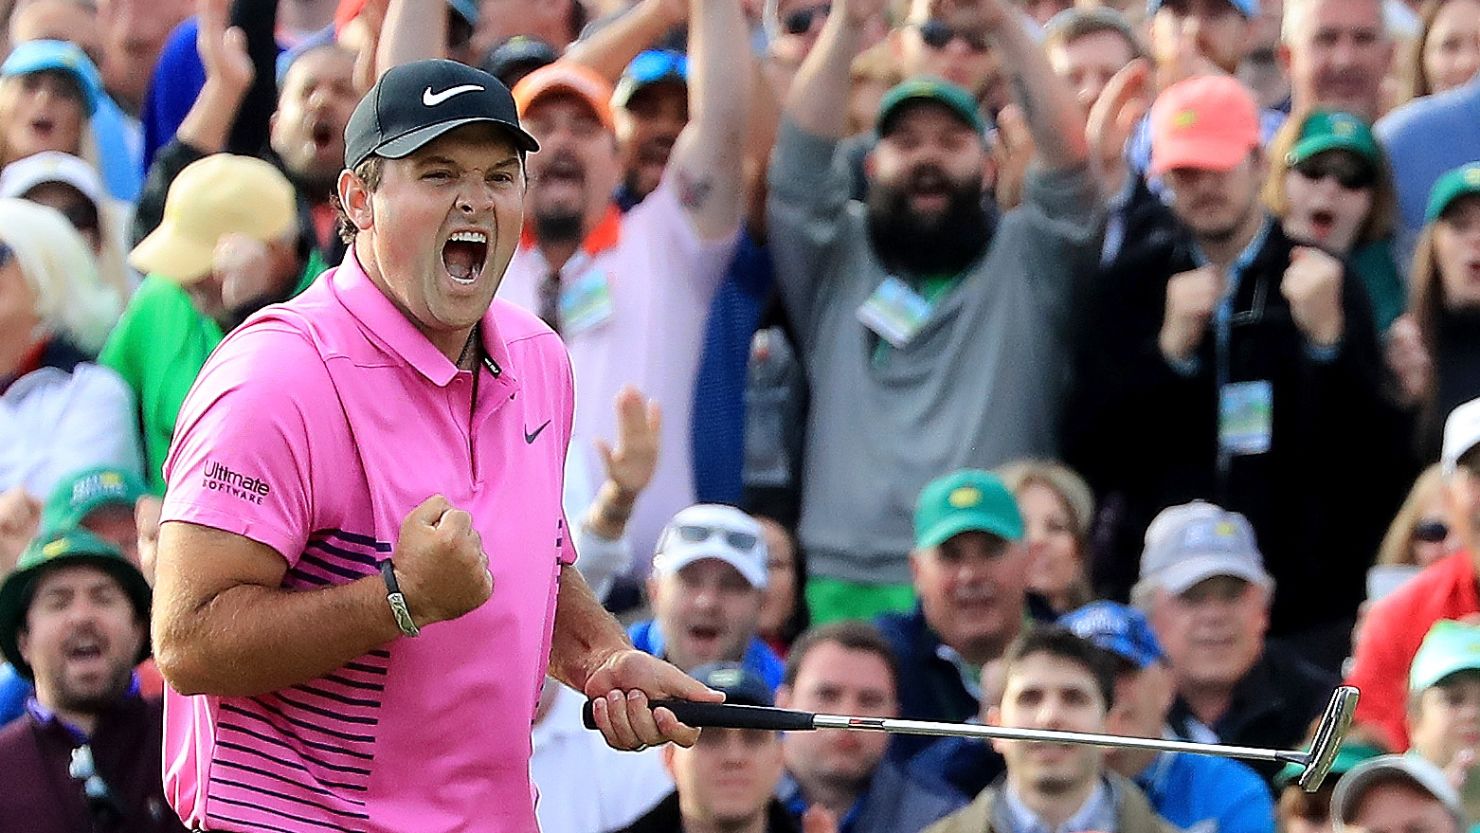 AUGUSTA, GA - APRIL 08:  Patrick Reed of the United States celebrates after making par on the 18th green during the final round to win the 2018 Masters Tournament at Augusta National Golf Club on April 8, 2018 in Augusta, Georgia.  (Photo by David Cannon/Getty Images)